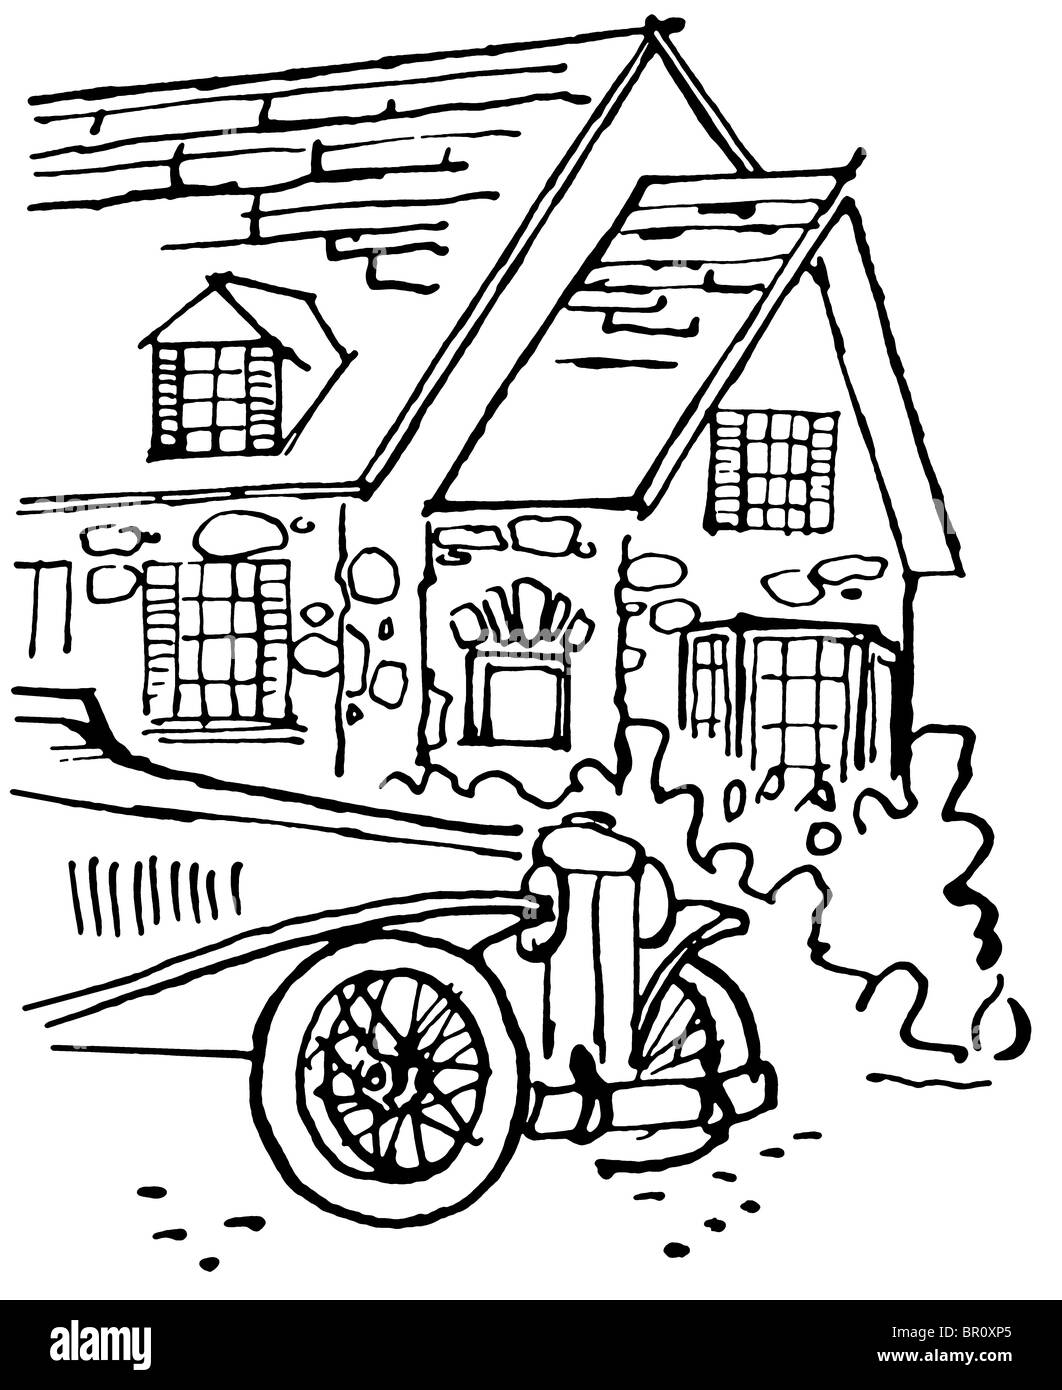 A black and white version of an illustration of a home with an old fashioned car in the foreground Stock Photo